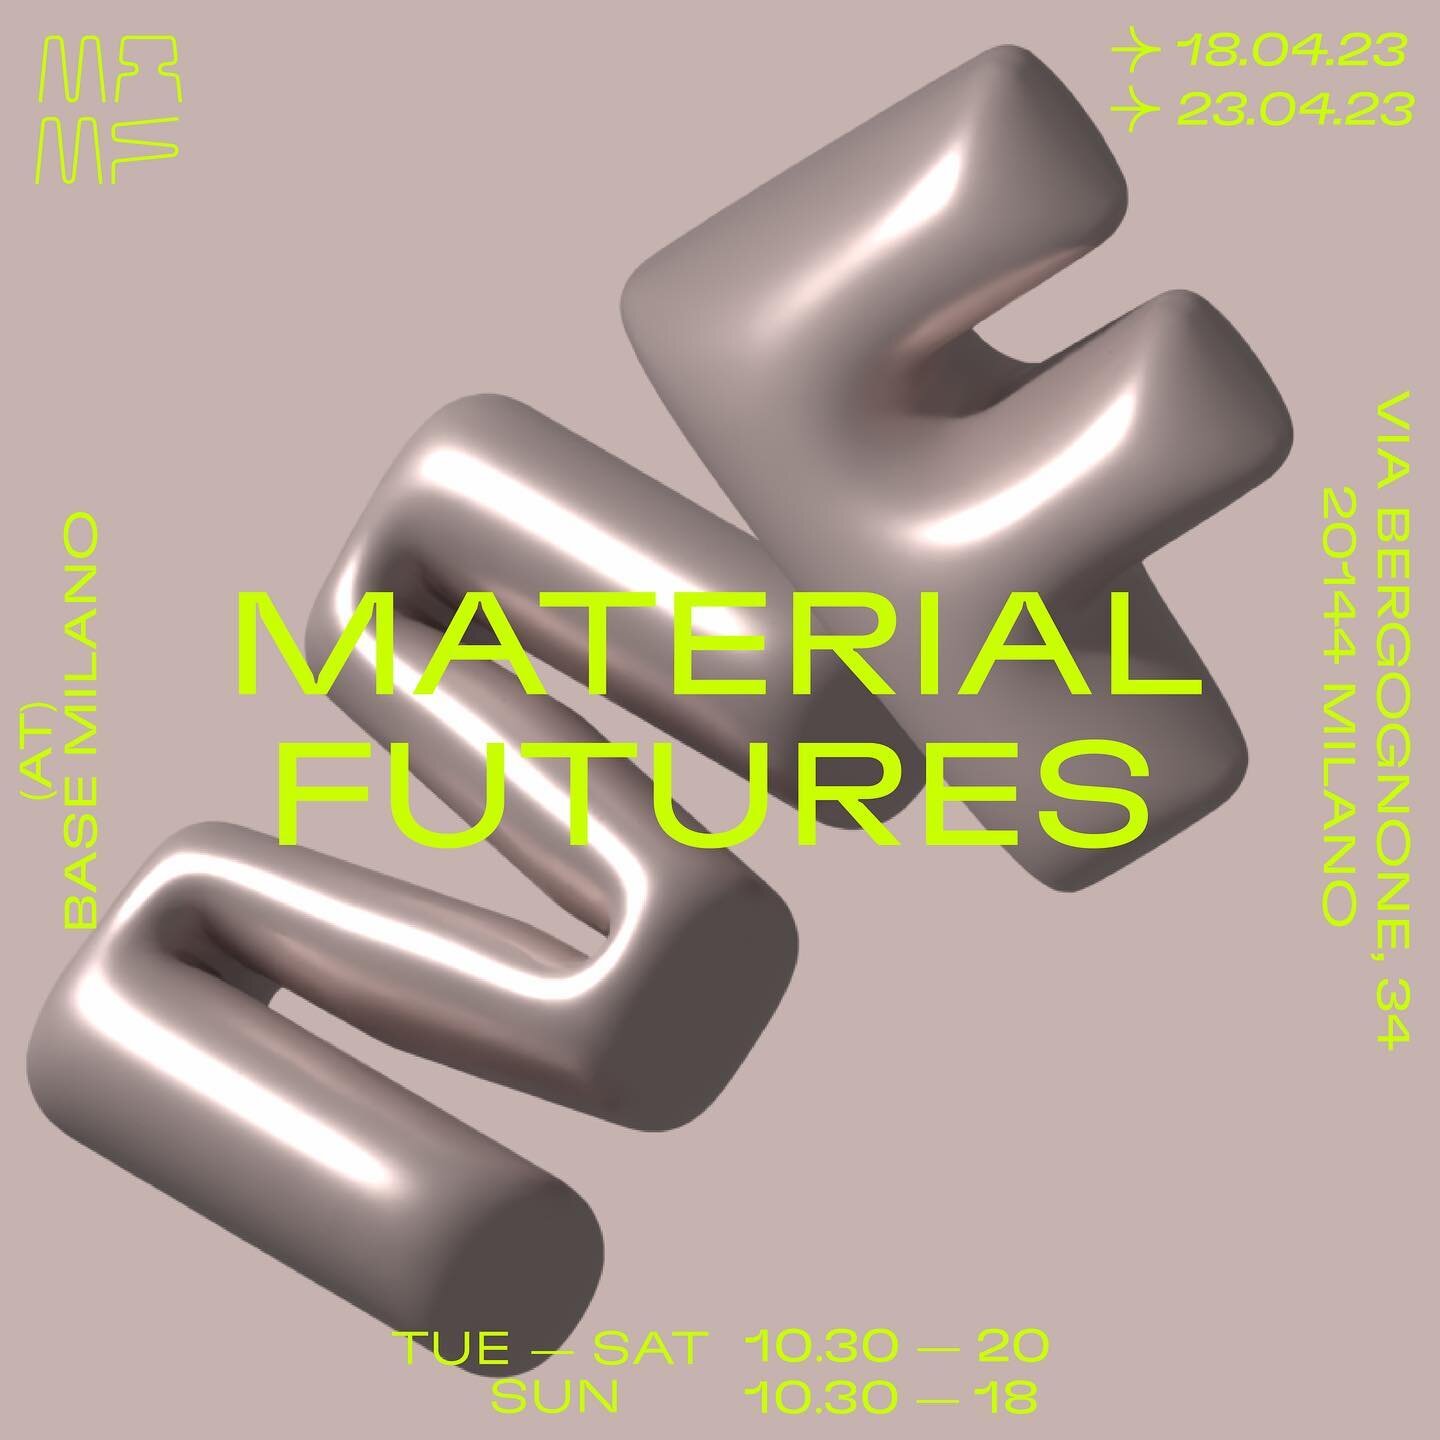 WE&rsquo;RE OPEN! 
🇮🇹MA MATERIAL FUTURES IS AT MILAN DESIGN WEEK 2023🇮🇹

Come and see us at BASE Milano, we might be a bit biased, but this is one not to miss 👀

Tuesday 18th April - Sunday 23rd April

Address: 
Via Bergognone, 34, 20144 Milano
